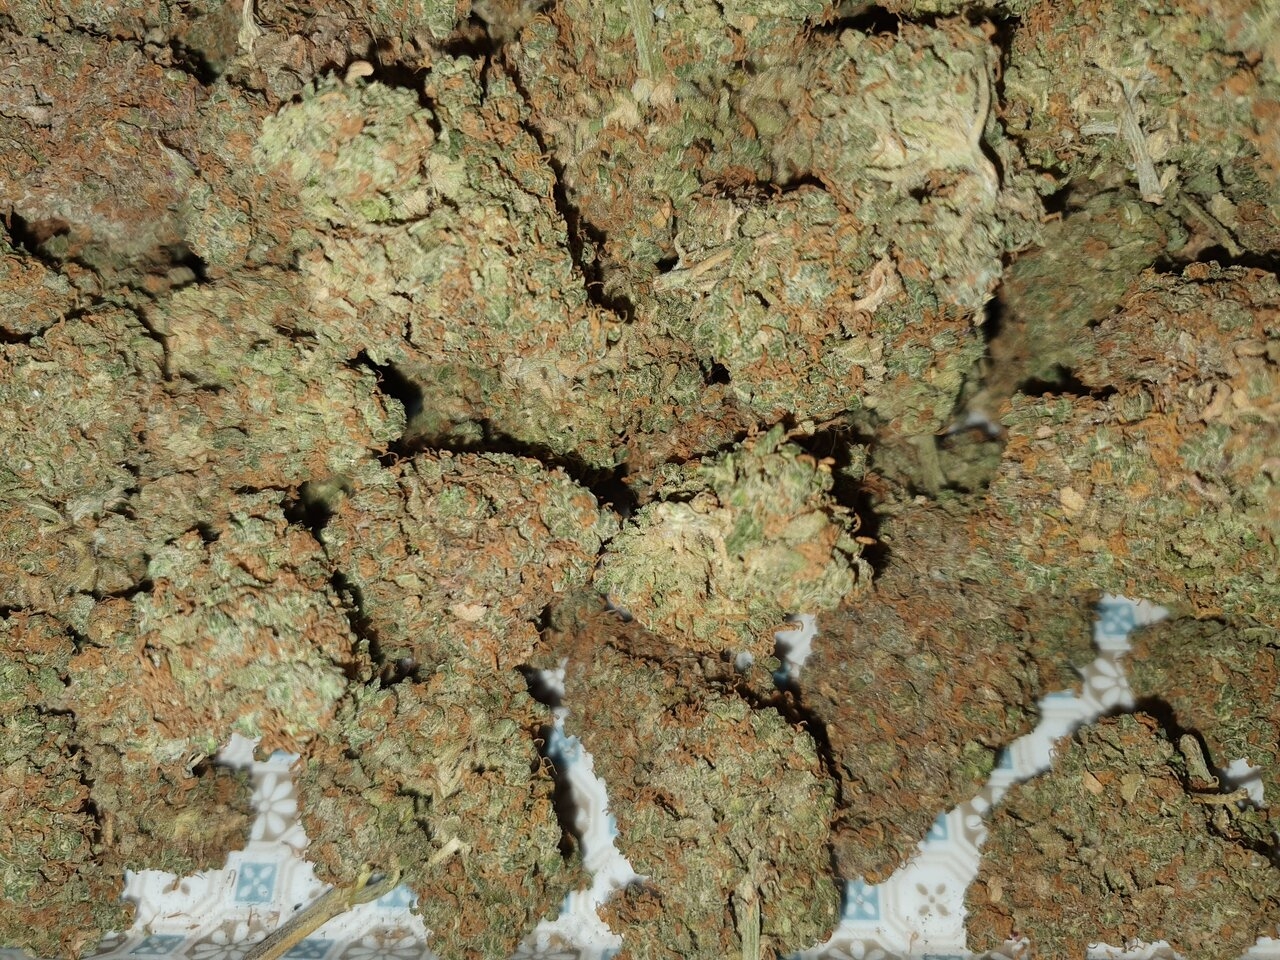 The rest of the other green crack